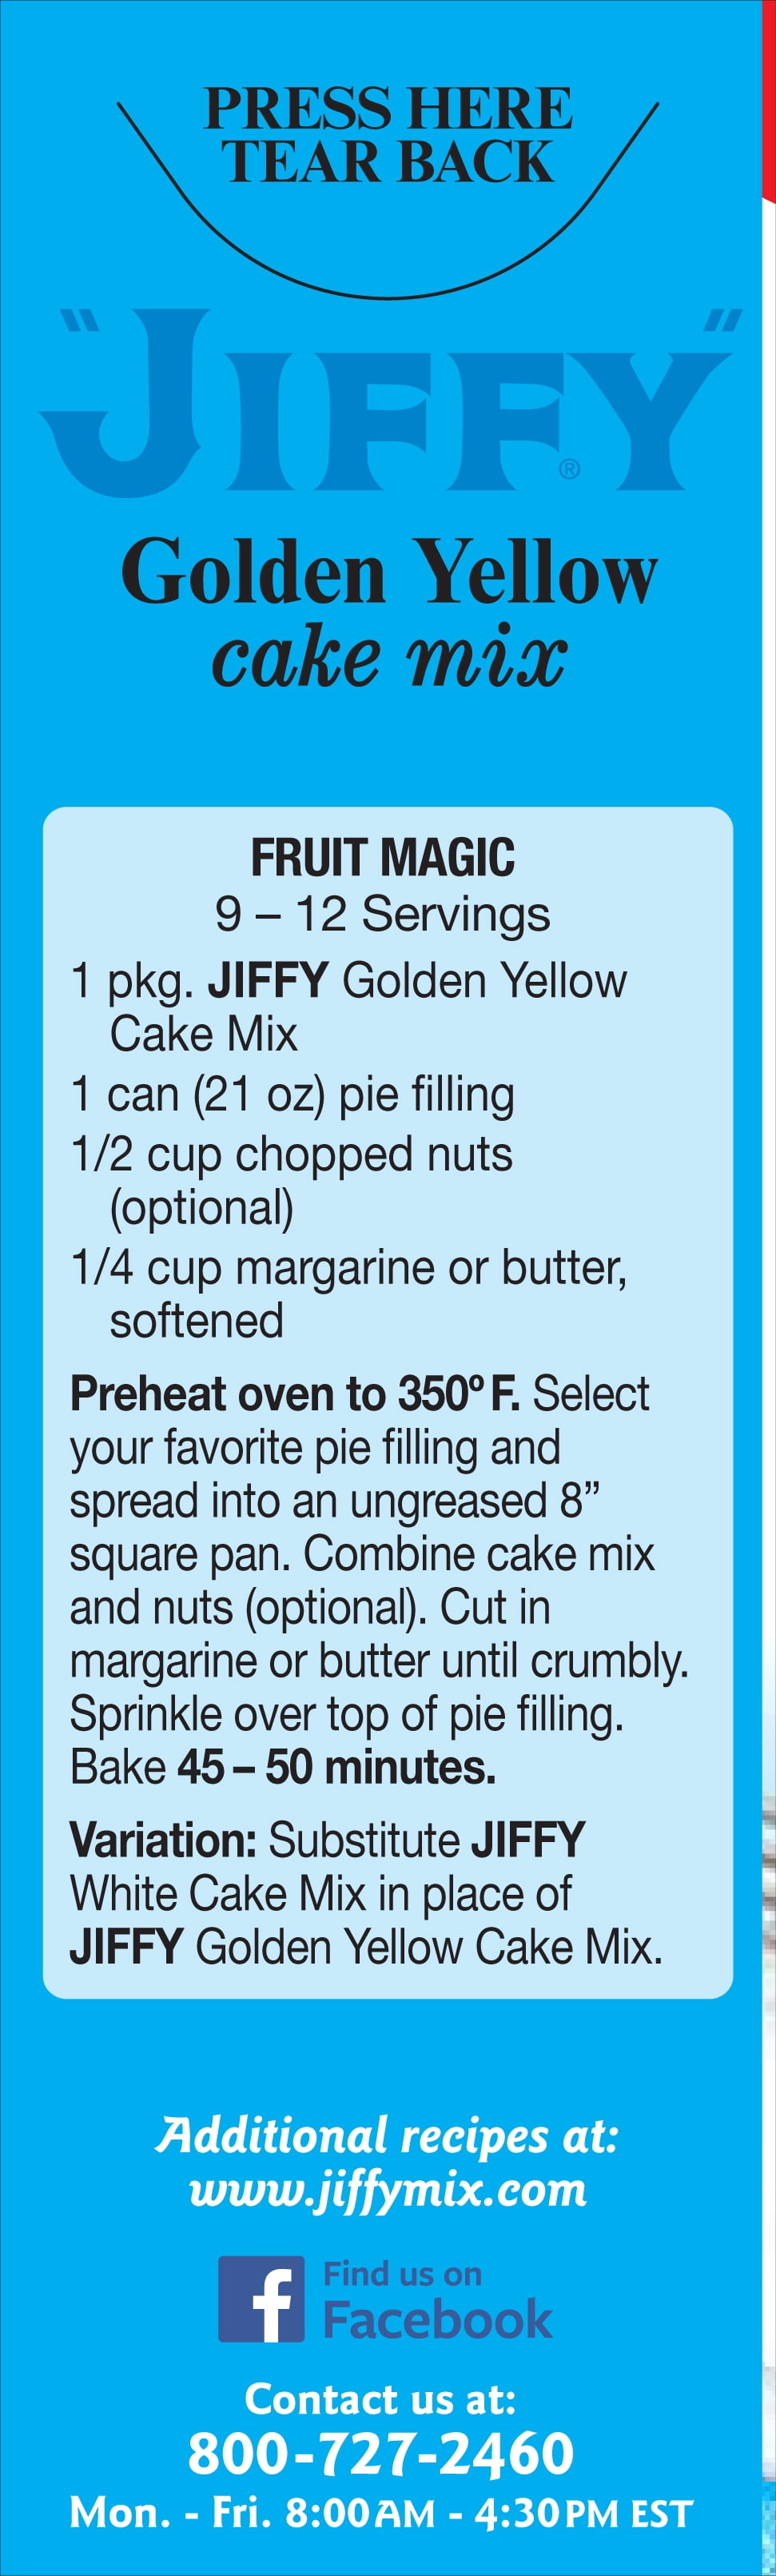 JIFFY Mix - Chewy Bars made with “JIFFY” Golden Yellow Cake Mix are the  perfect addition to any on-the-go lunch bag and also make a great afternoon  snack. Just be sure to